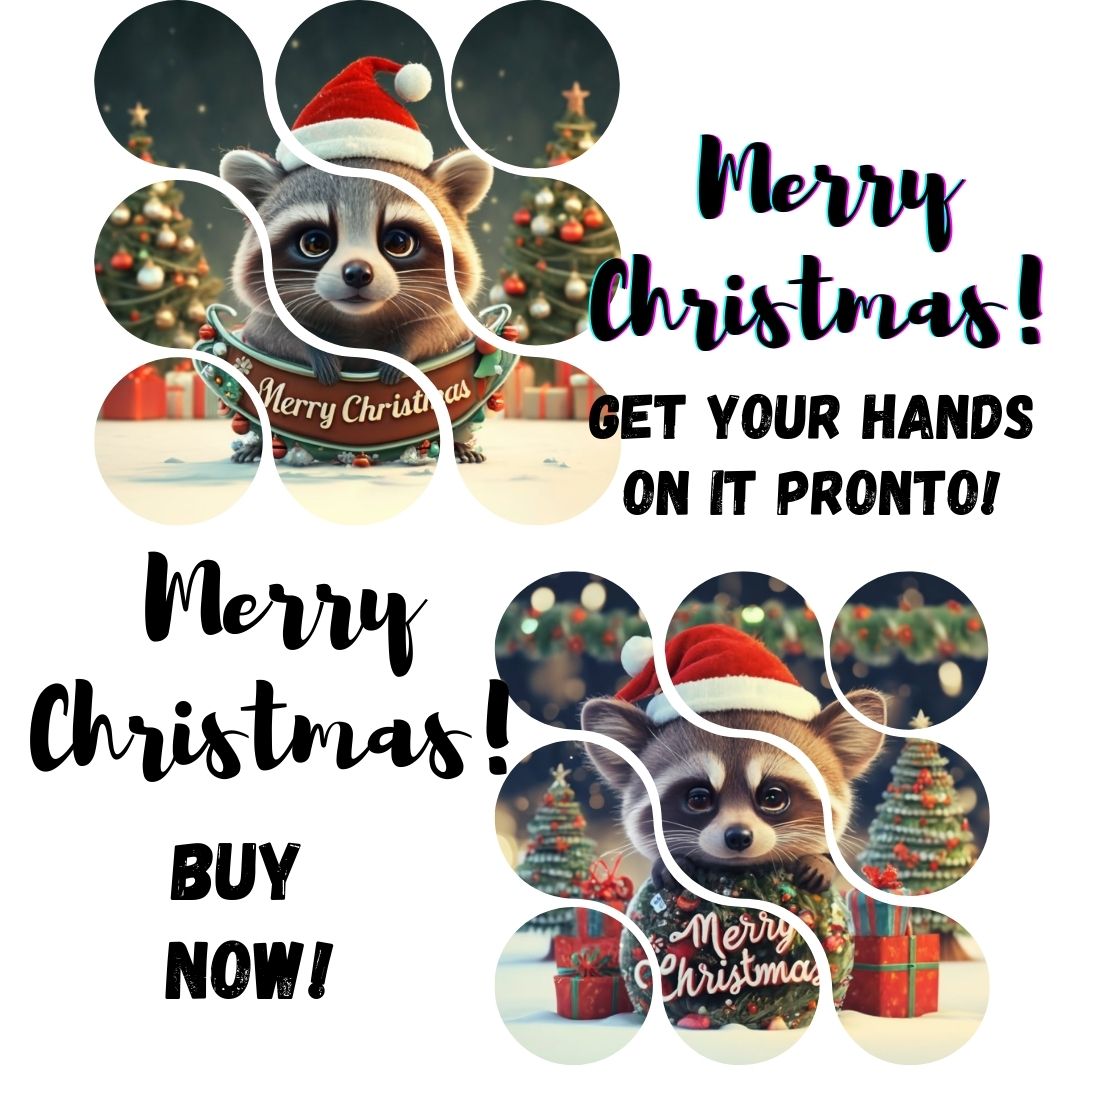 "Christmas Charm: Cute Animal Holiday Image for Sale" preview image.